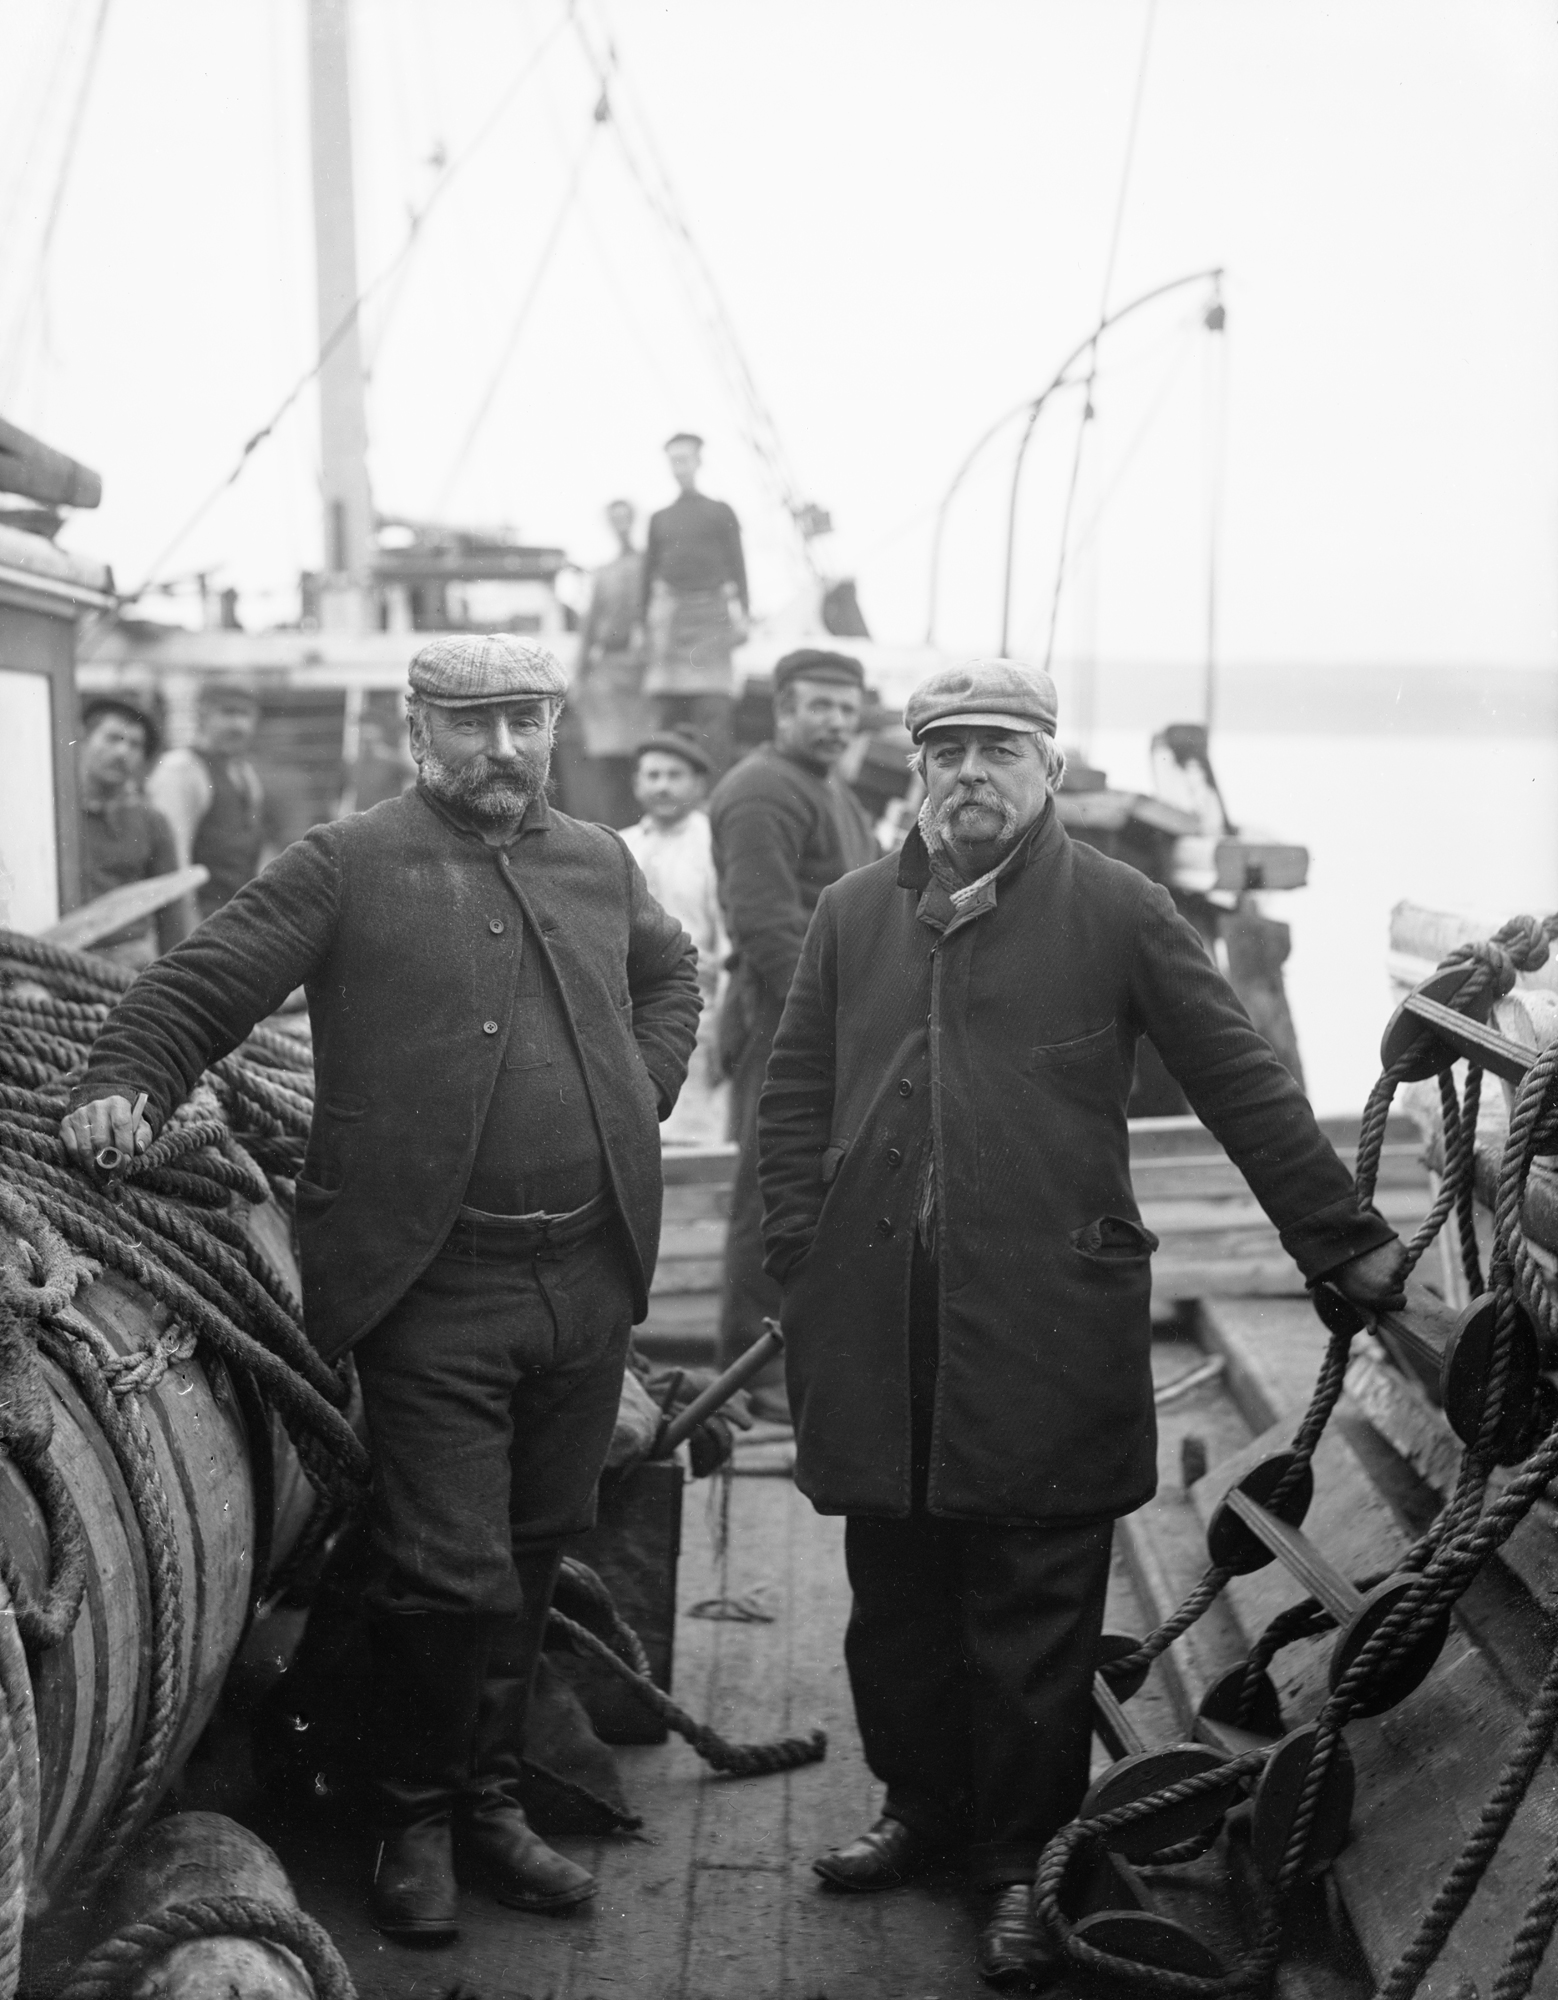 Captain and First Mate of The Hansa (8660291376)